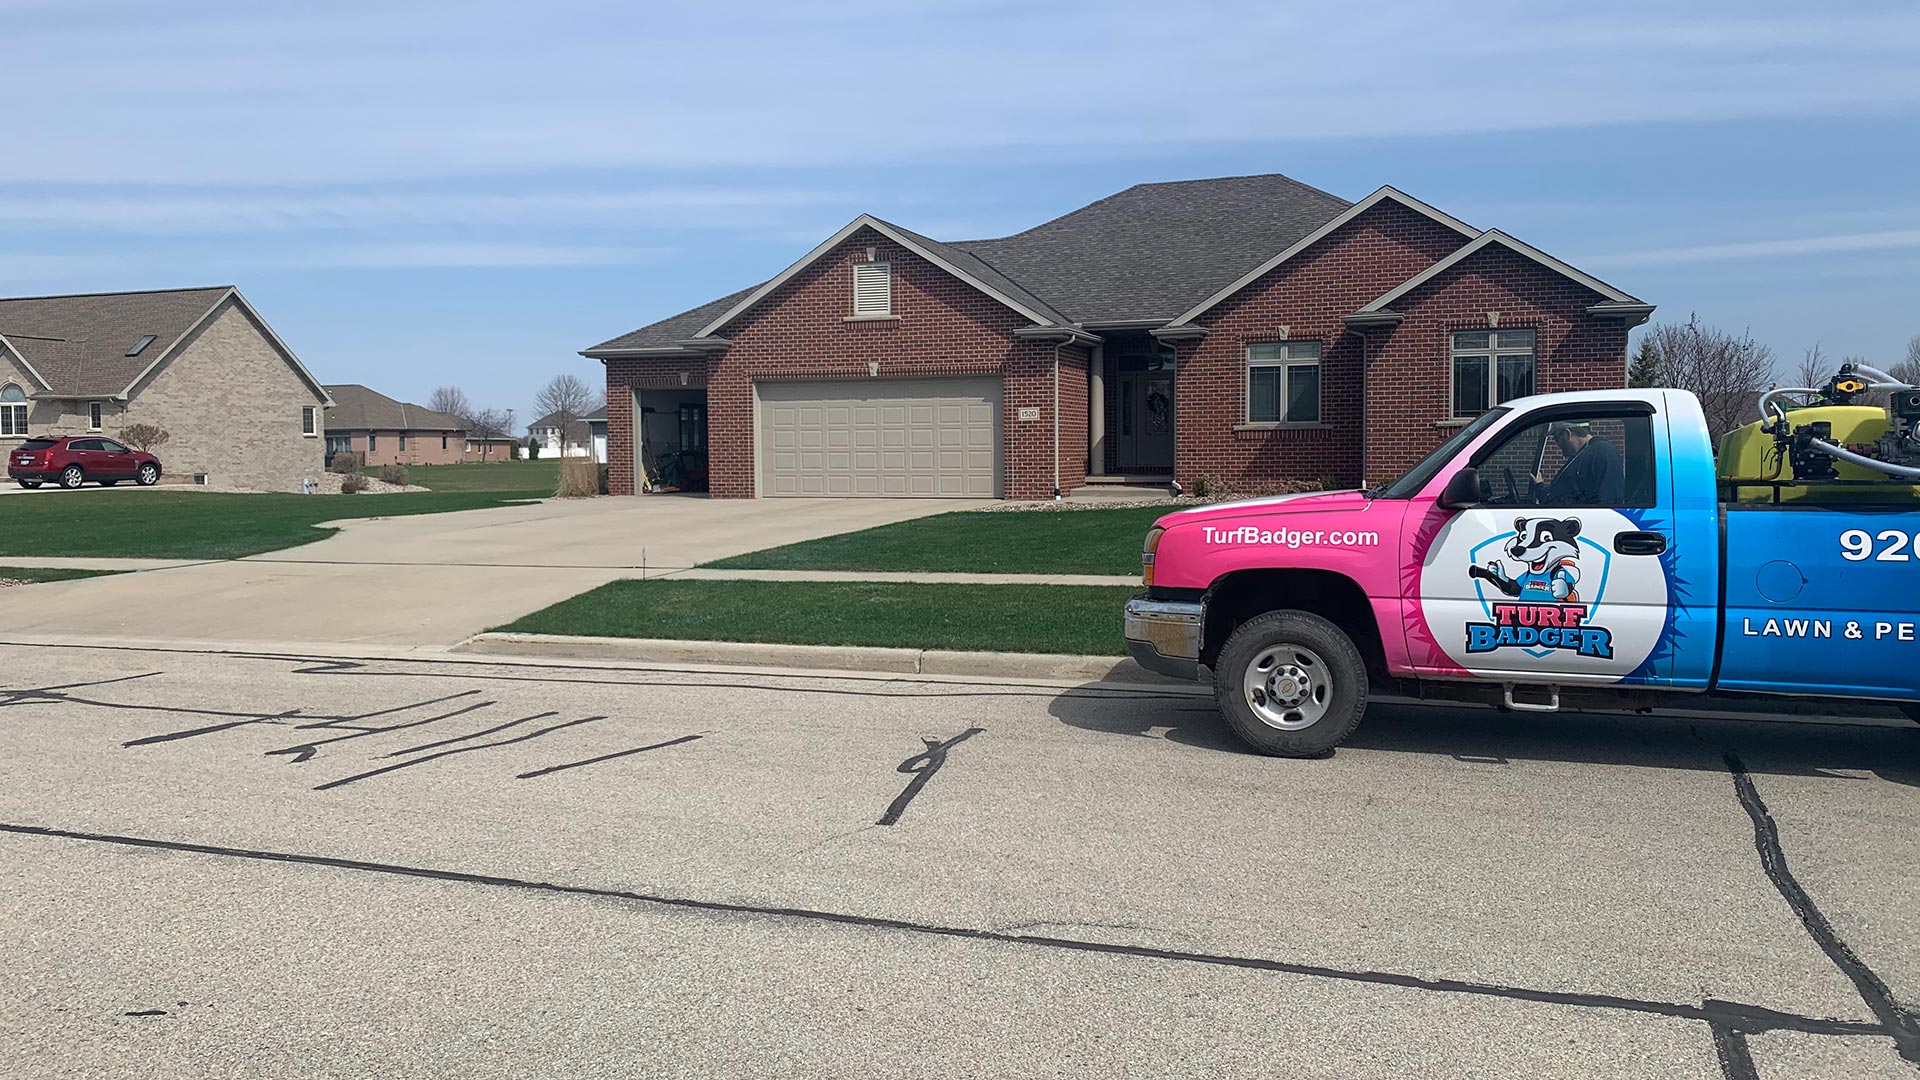 Turf Badger lawn care service truck at a home in Bellevue, Wisconsin.